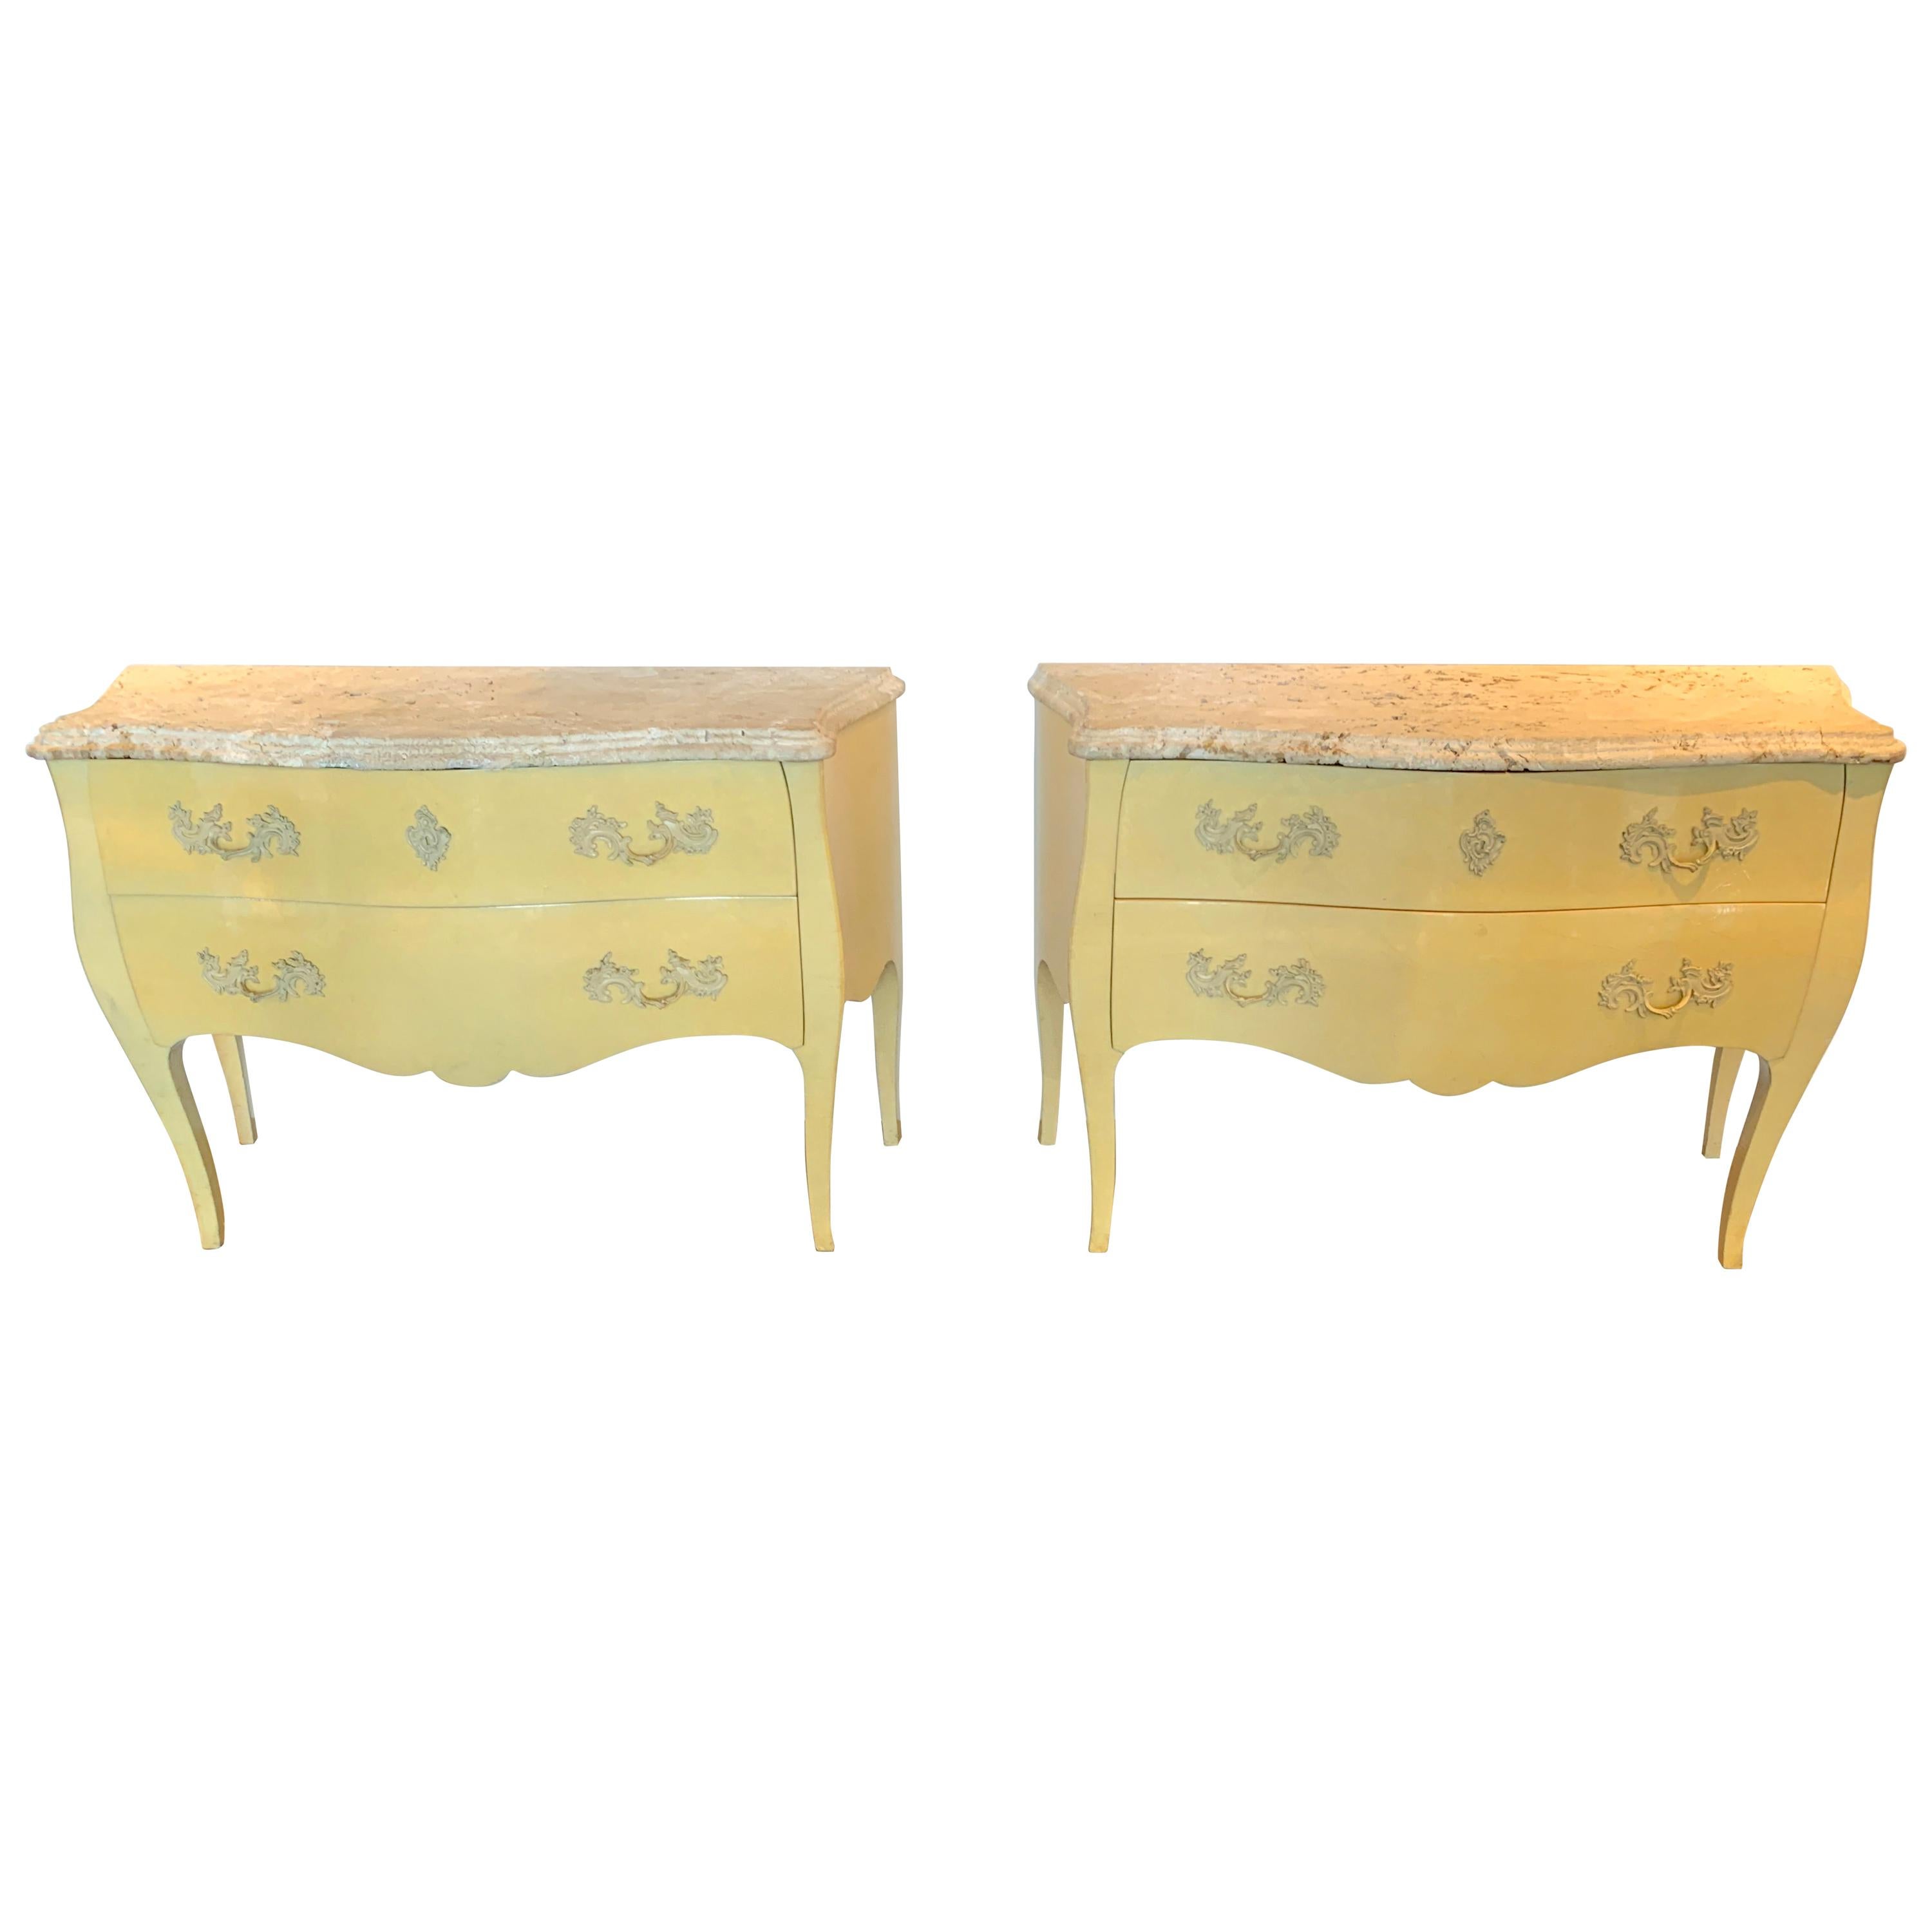 Pair of Yellow Lacquered Commodes with Coral Stone, by Decorative Crafts For Sale